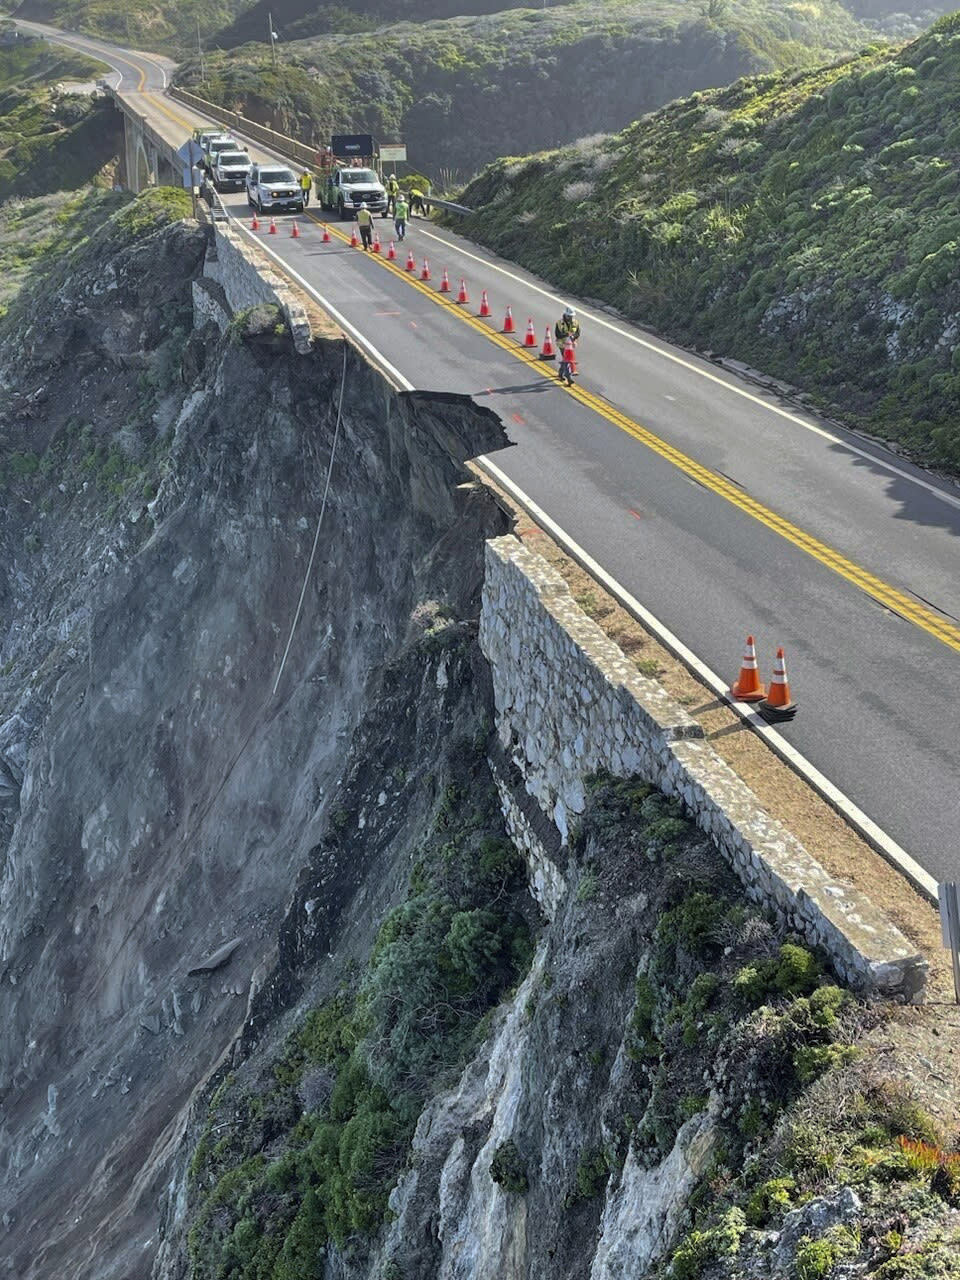 This photo provided by Caltrans shows a damaged section of Highway 1, Sunday, March 31, 2024, south of Rocky Creek Bridge in Big Sur, Calif. Authorities urged motorists to avoid the scenic highway after a section of the coastal route collapsed during an Easter weekend storm, forcing closures and stranding motorists near Big Sur, authorities said. (Caltrans District 5 via AP)